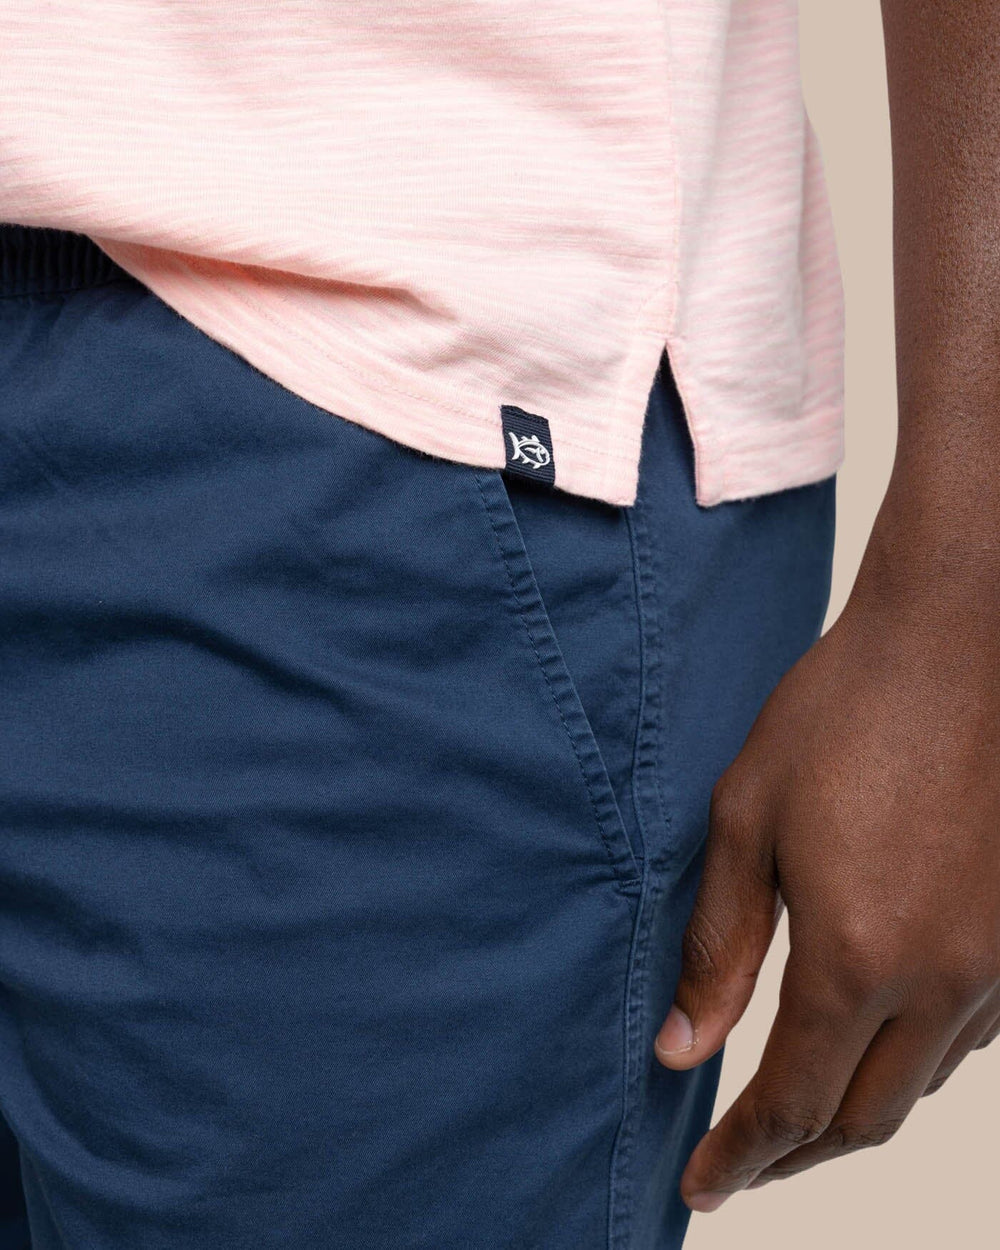 The detail view of the Southern Tide Sun Farer Summertree Stripe Polo by Southern Tide - Pale Rosette Pink